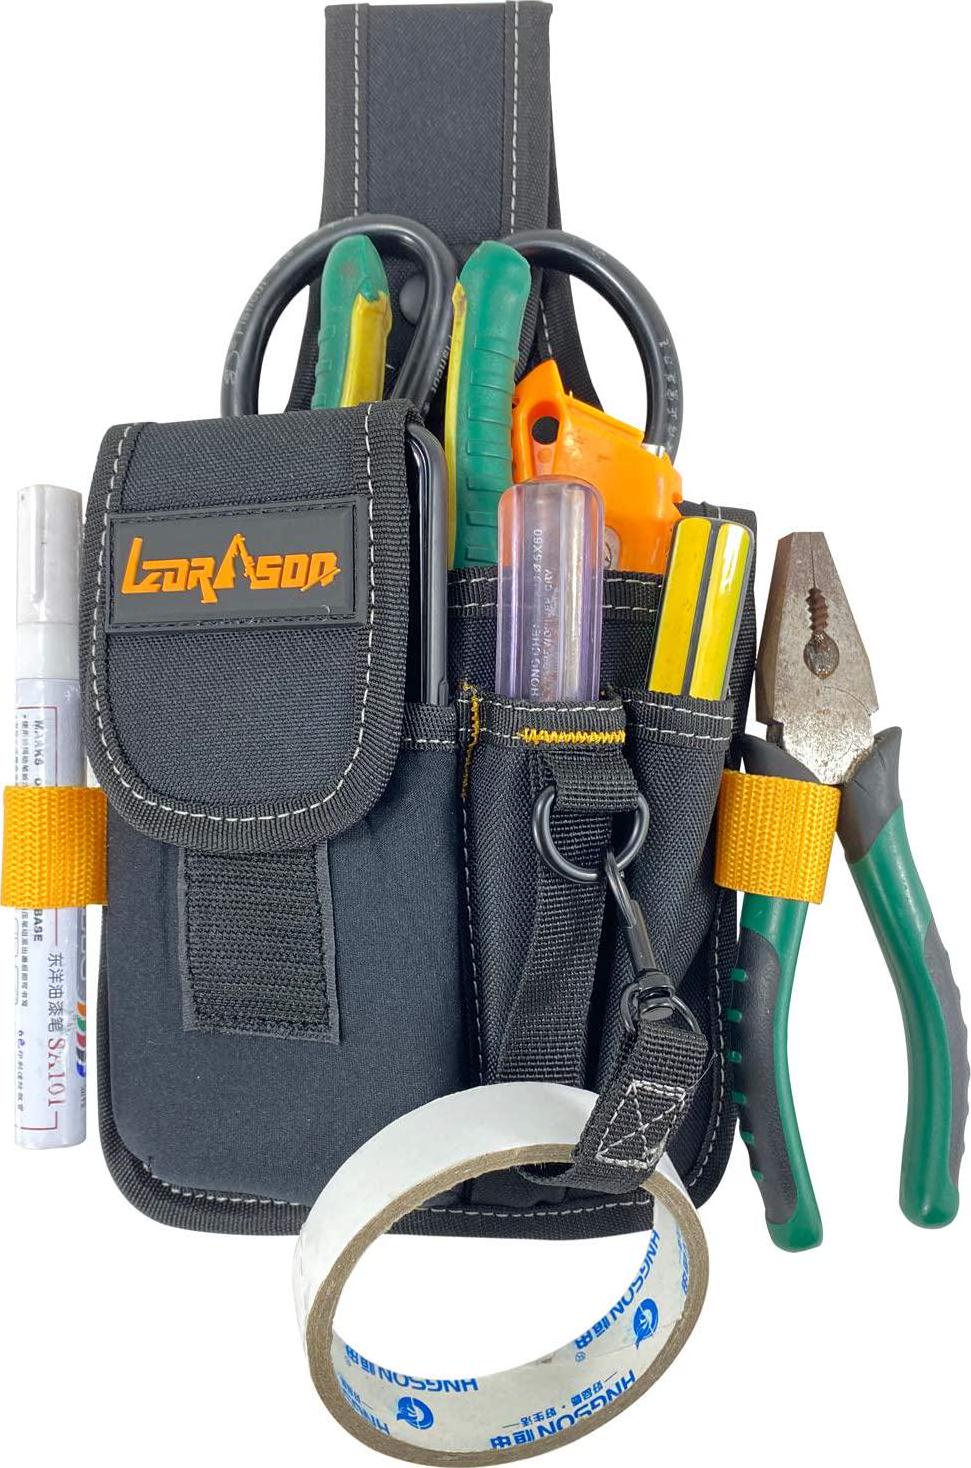 Lzdrason, Electrician Tool Pouch, Technician s Tool Pouch Bag Attachment for Tool Belt, Small/Mini Tool Storage Organizer with 5-Pockets for Tool and Cell Phone and Pen.